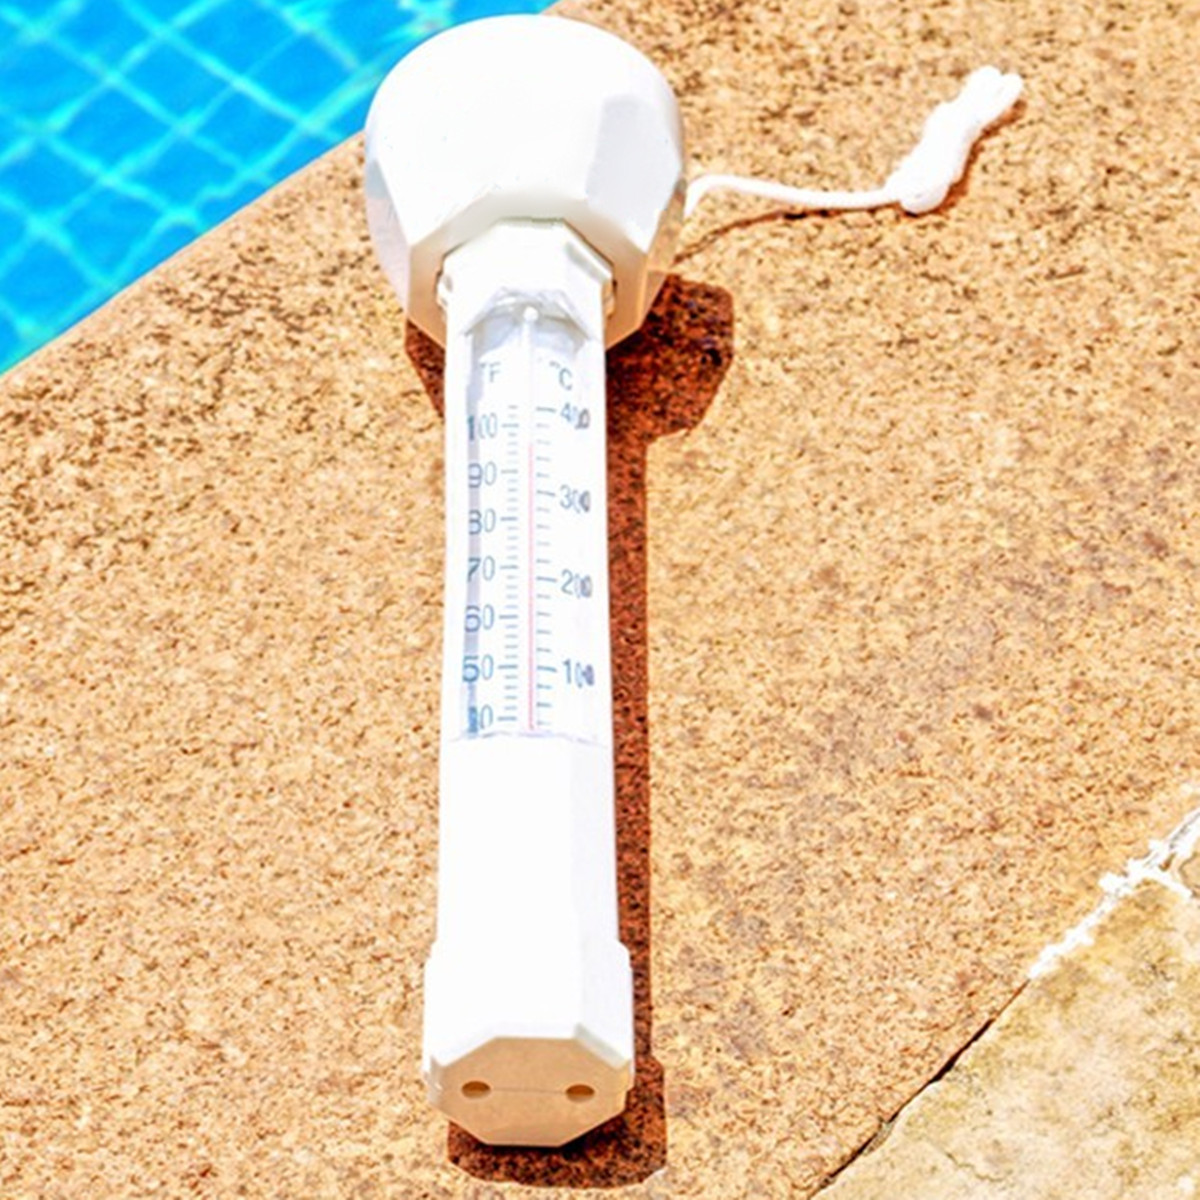 White-Floating-Water-Swimming-Pool-Bath-Spa-Hot-Tub-Temperature-Thermometer--1151459-3